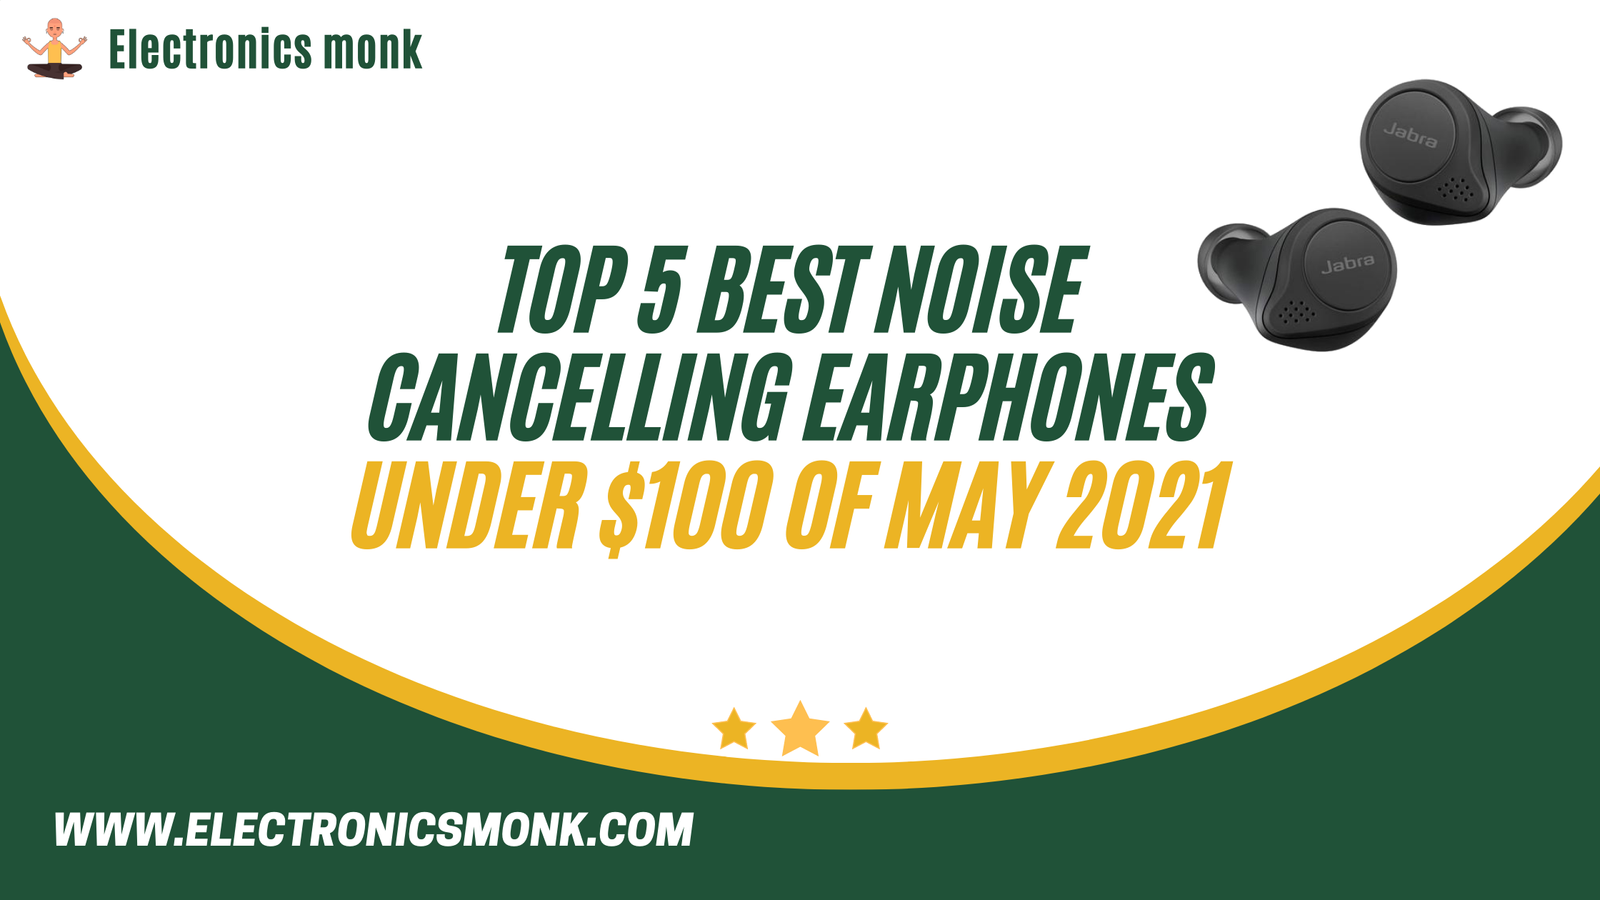 Top 5 Best Noise Cancelling Earphones Under $100 Of May 2021